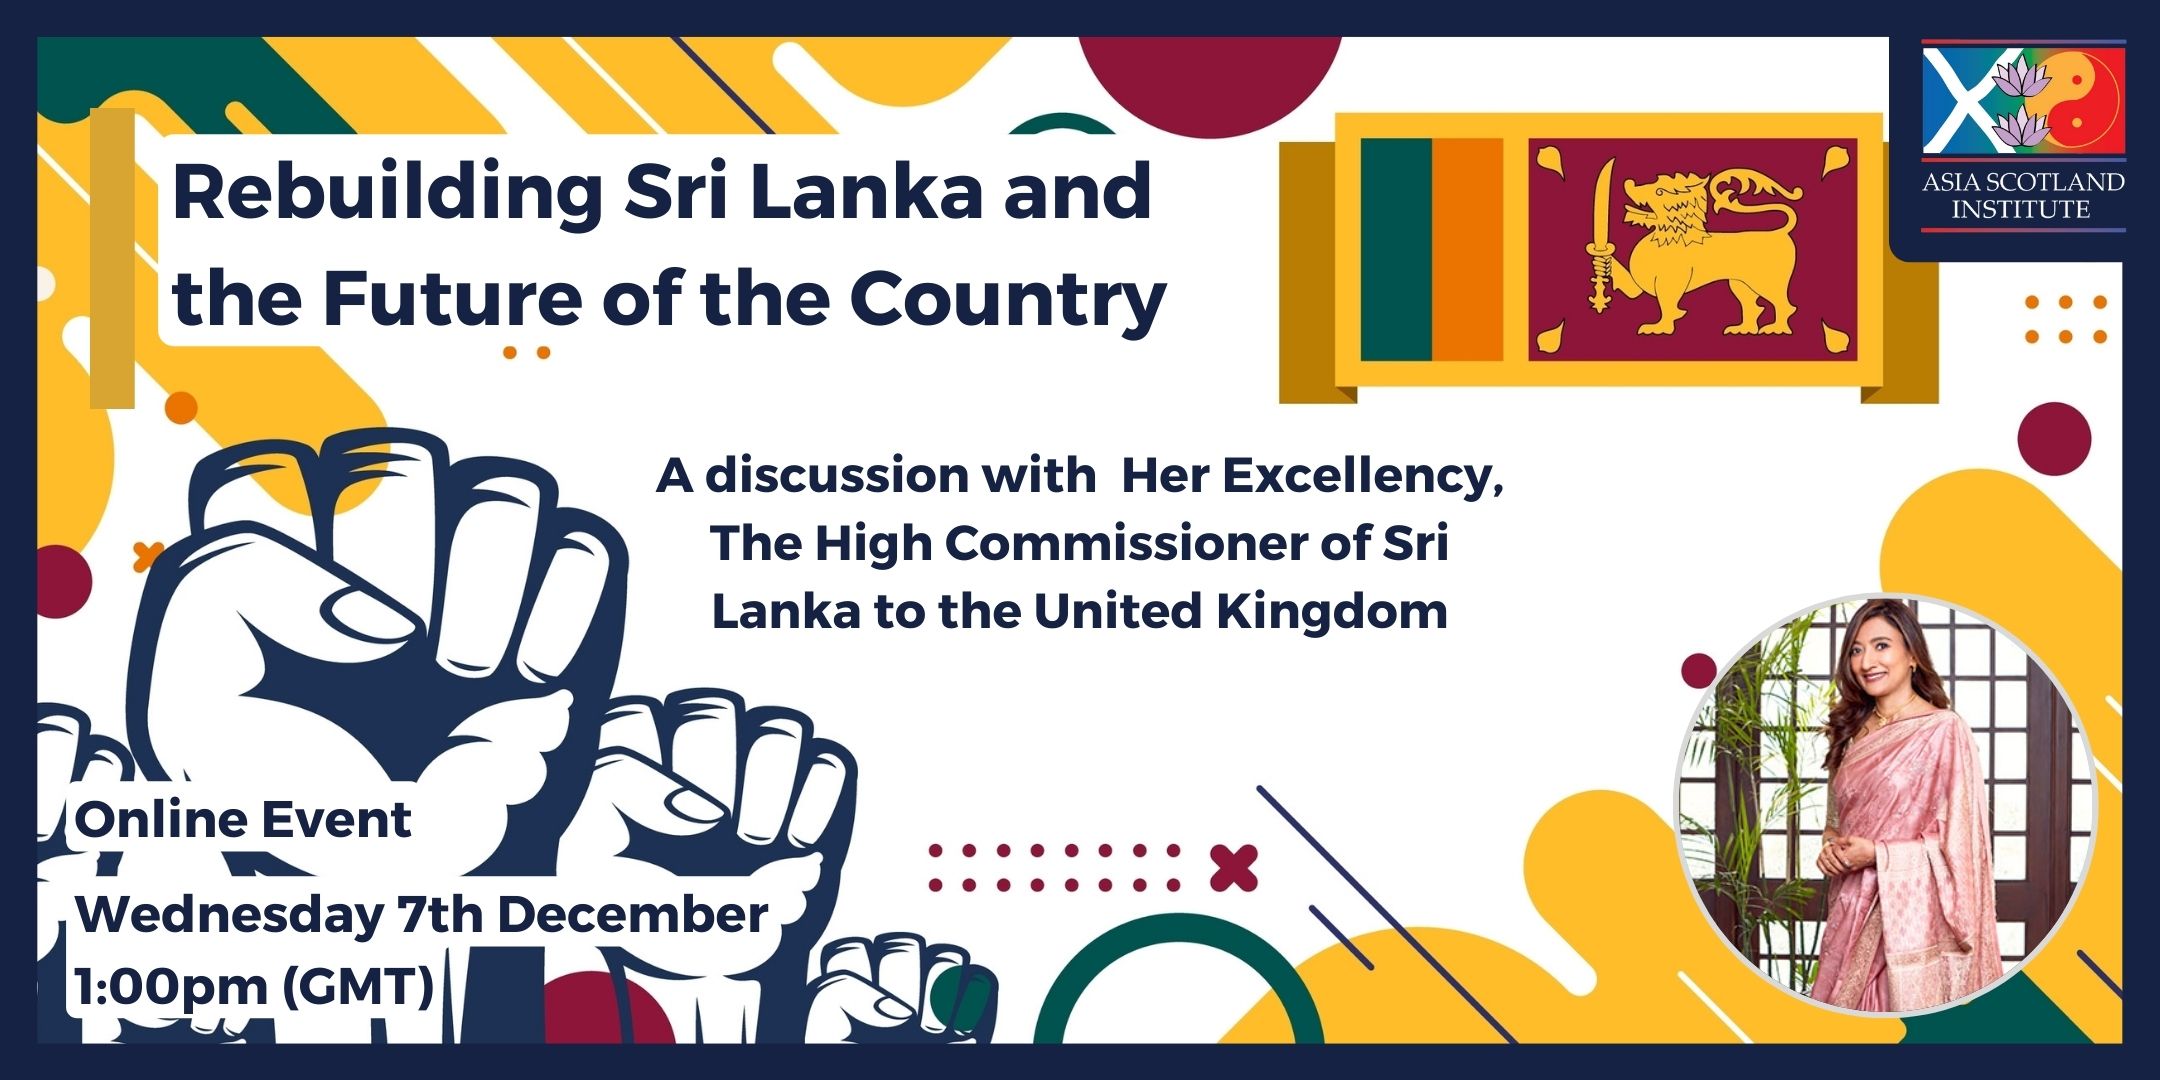 Event image for 'Rebuilding Sri Lanka and the Future of the Country'